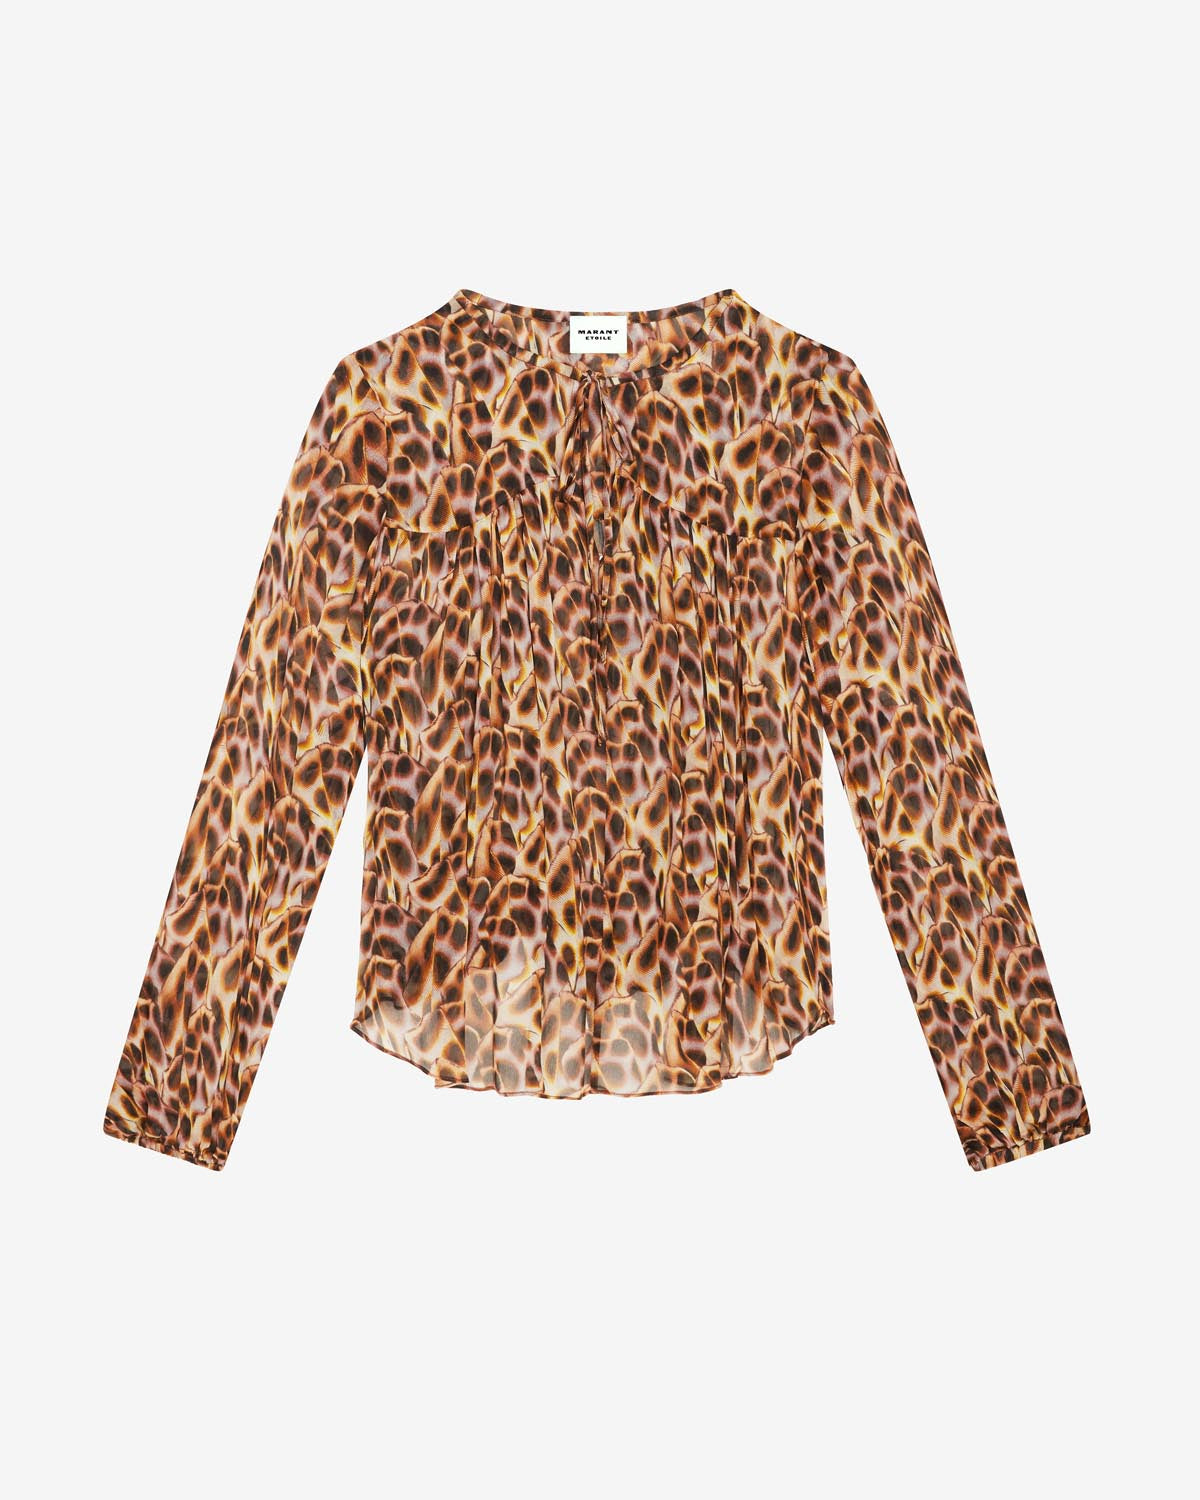 Tops and Shirts Etoile Woman | ISABEL MARANT Official